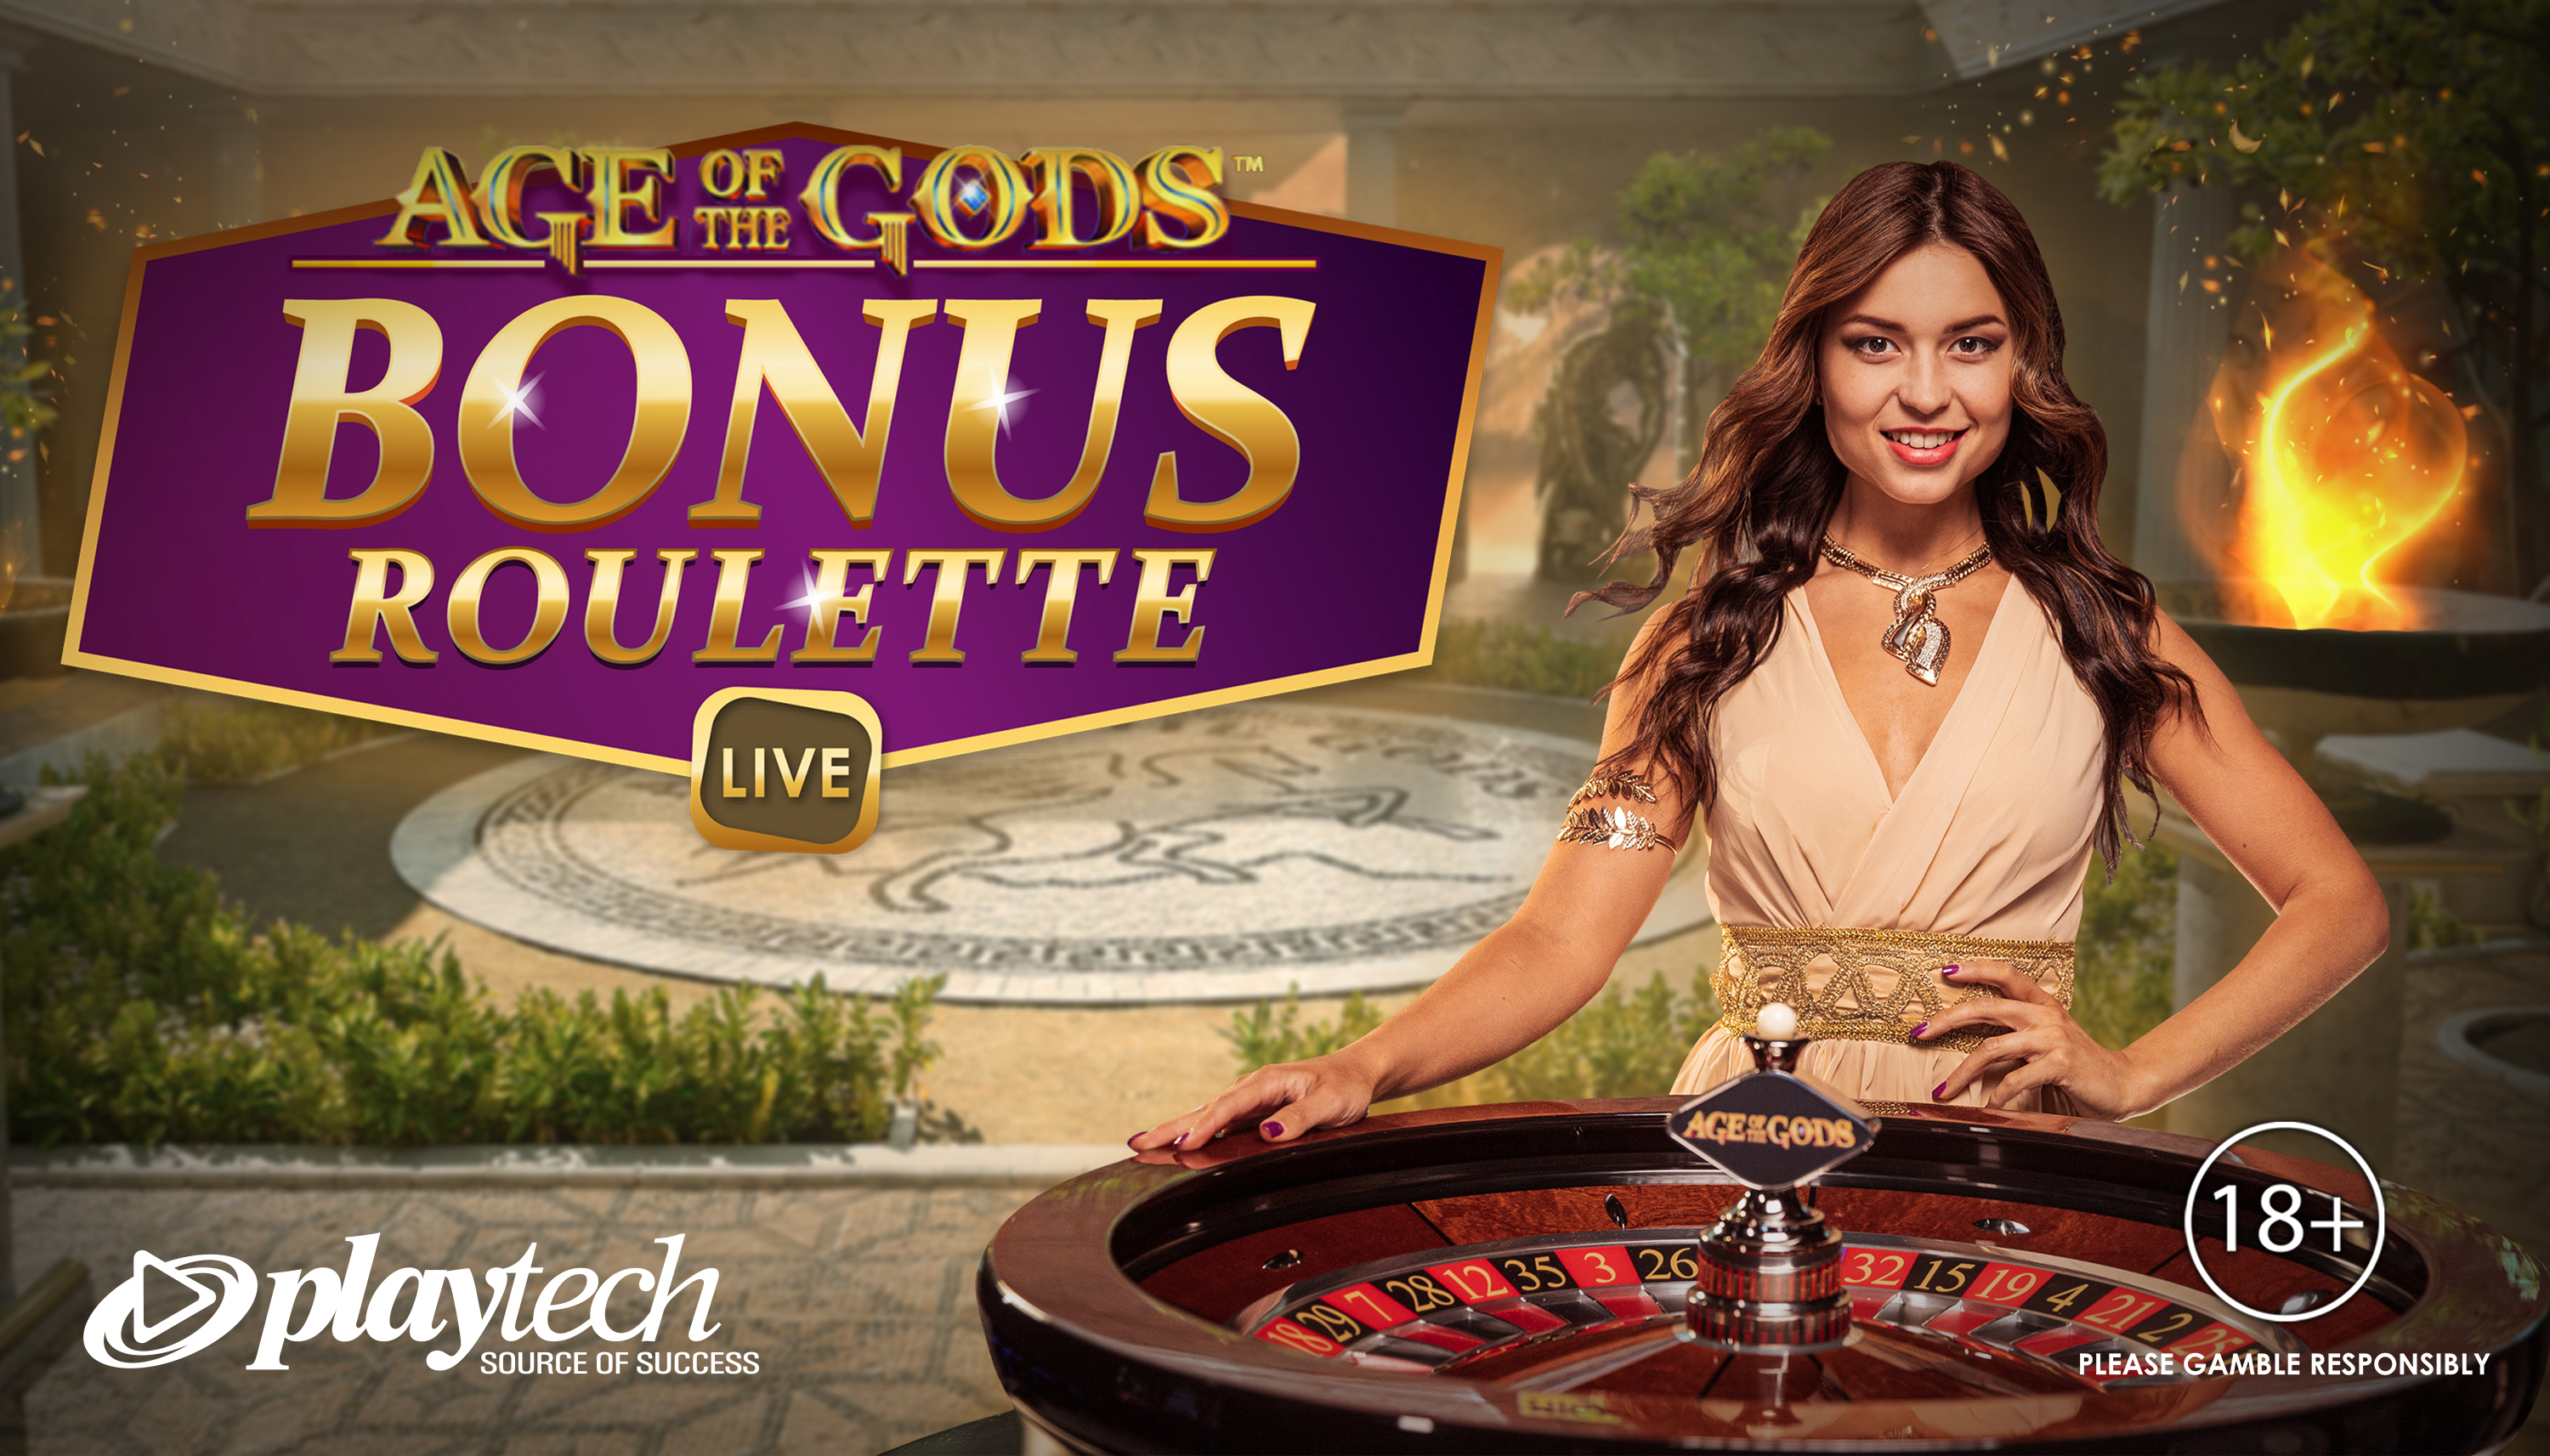 New Slots And Roulette Games From Playtech Launched